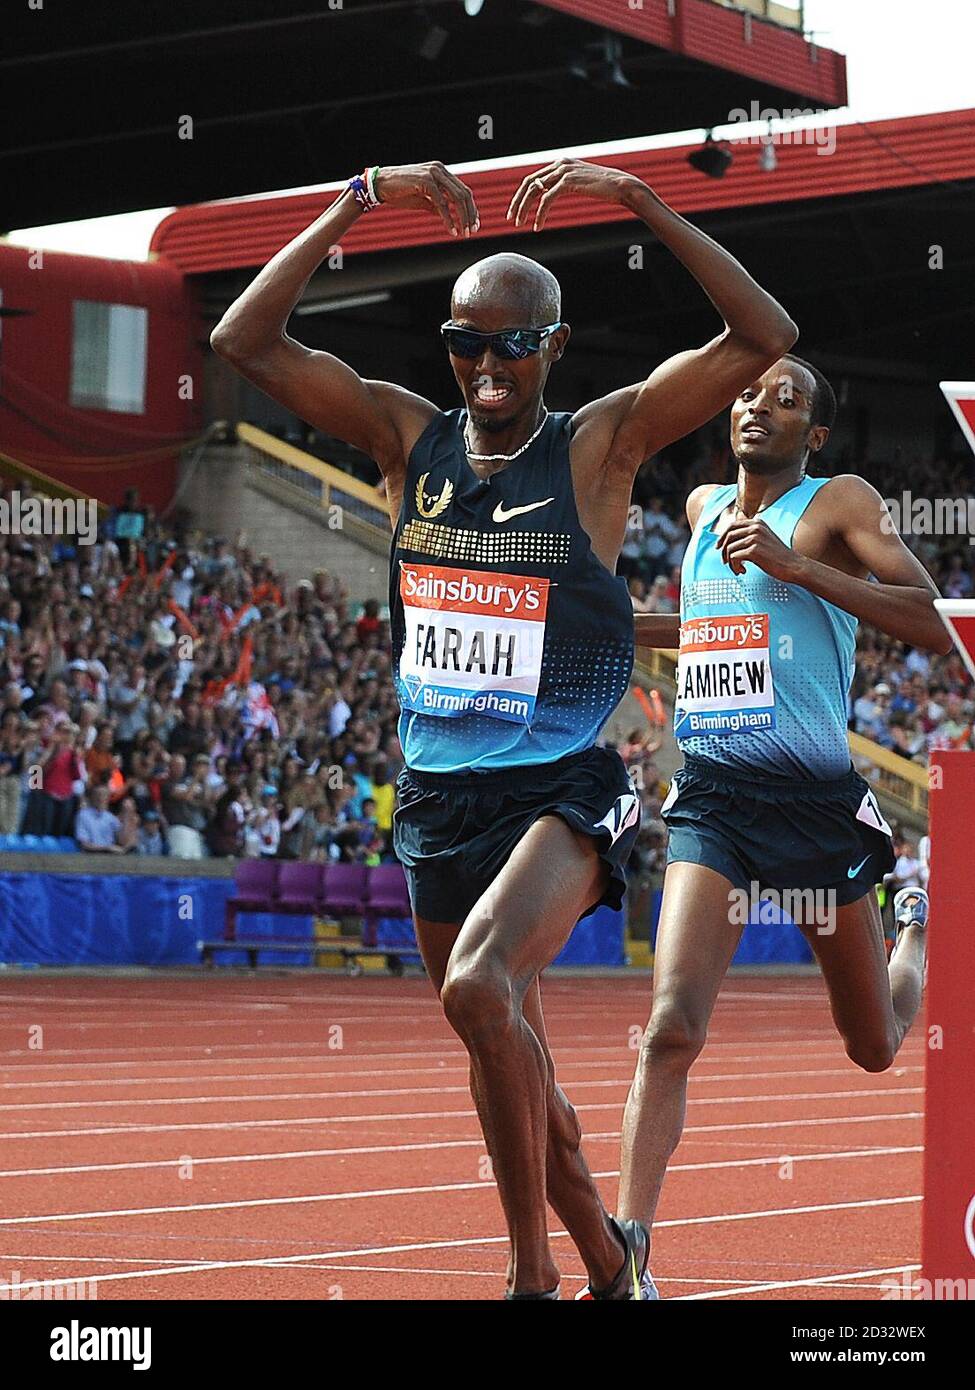 Great Britain's Mo Farah celebrates with the Mobot as he wins the Men's 5000m race during day two of the Birmingham Diamond League athletics meeting at the Birmingham Alexander Stadium, Birmingham. Stock Photo